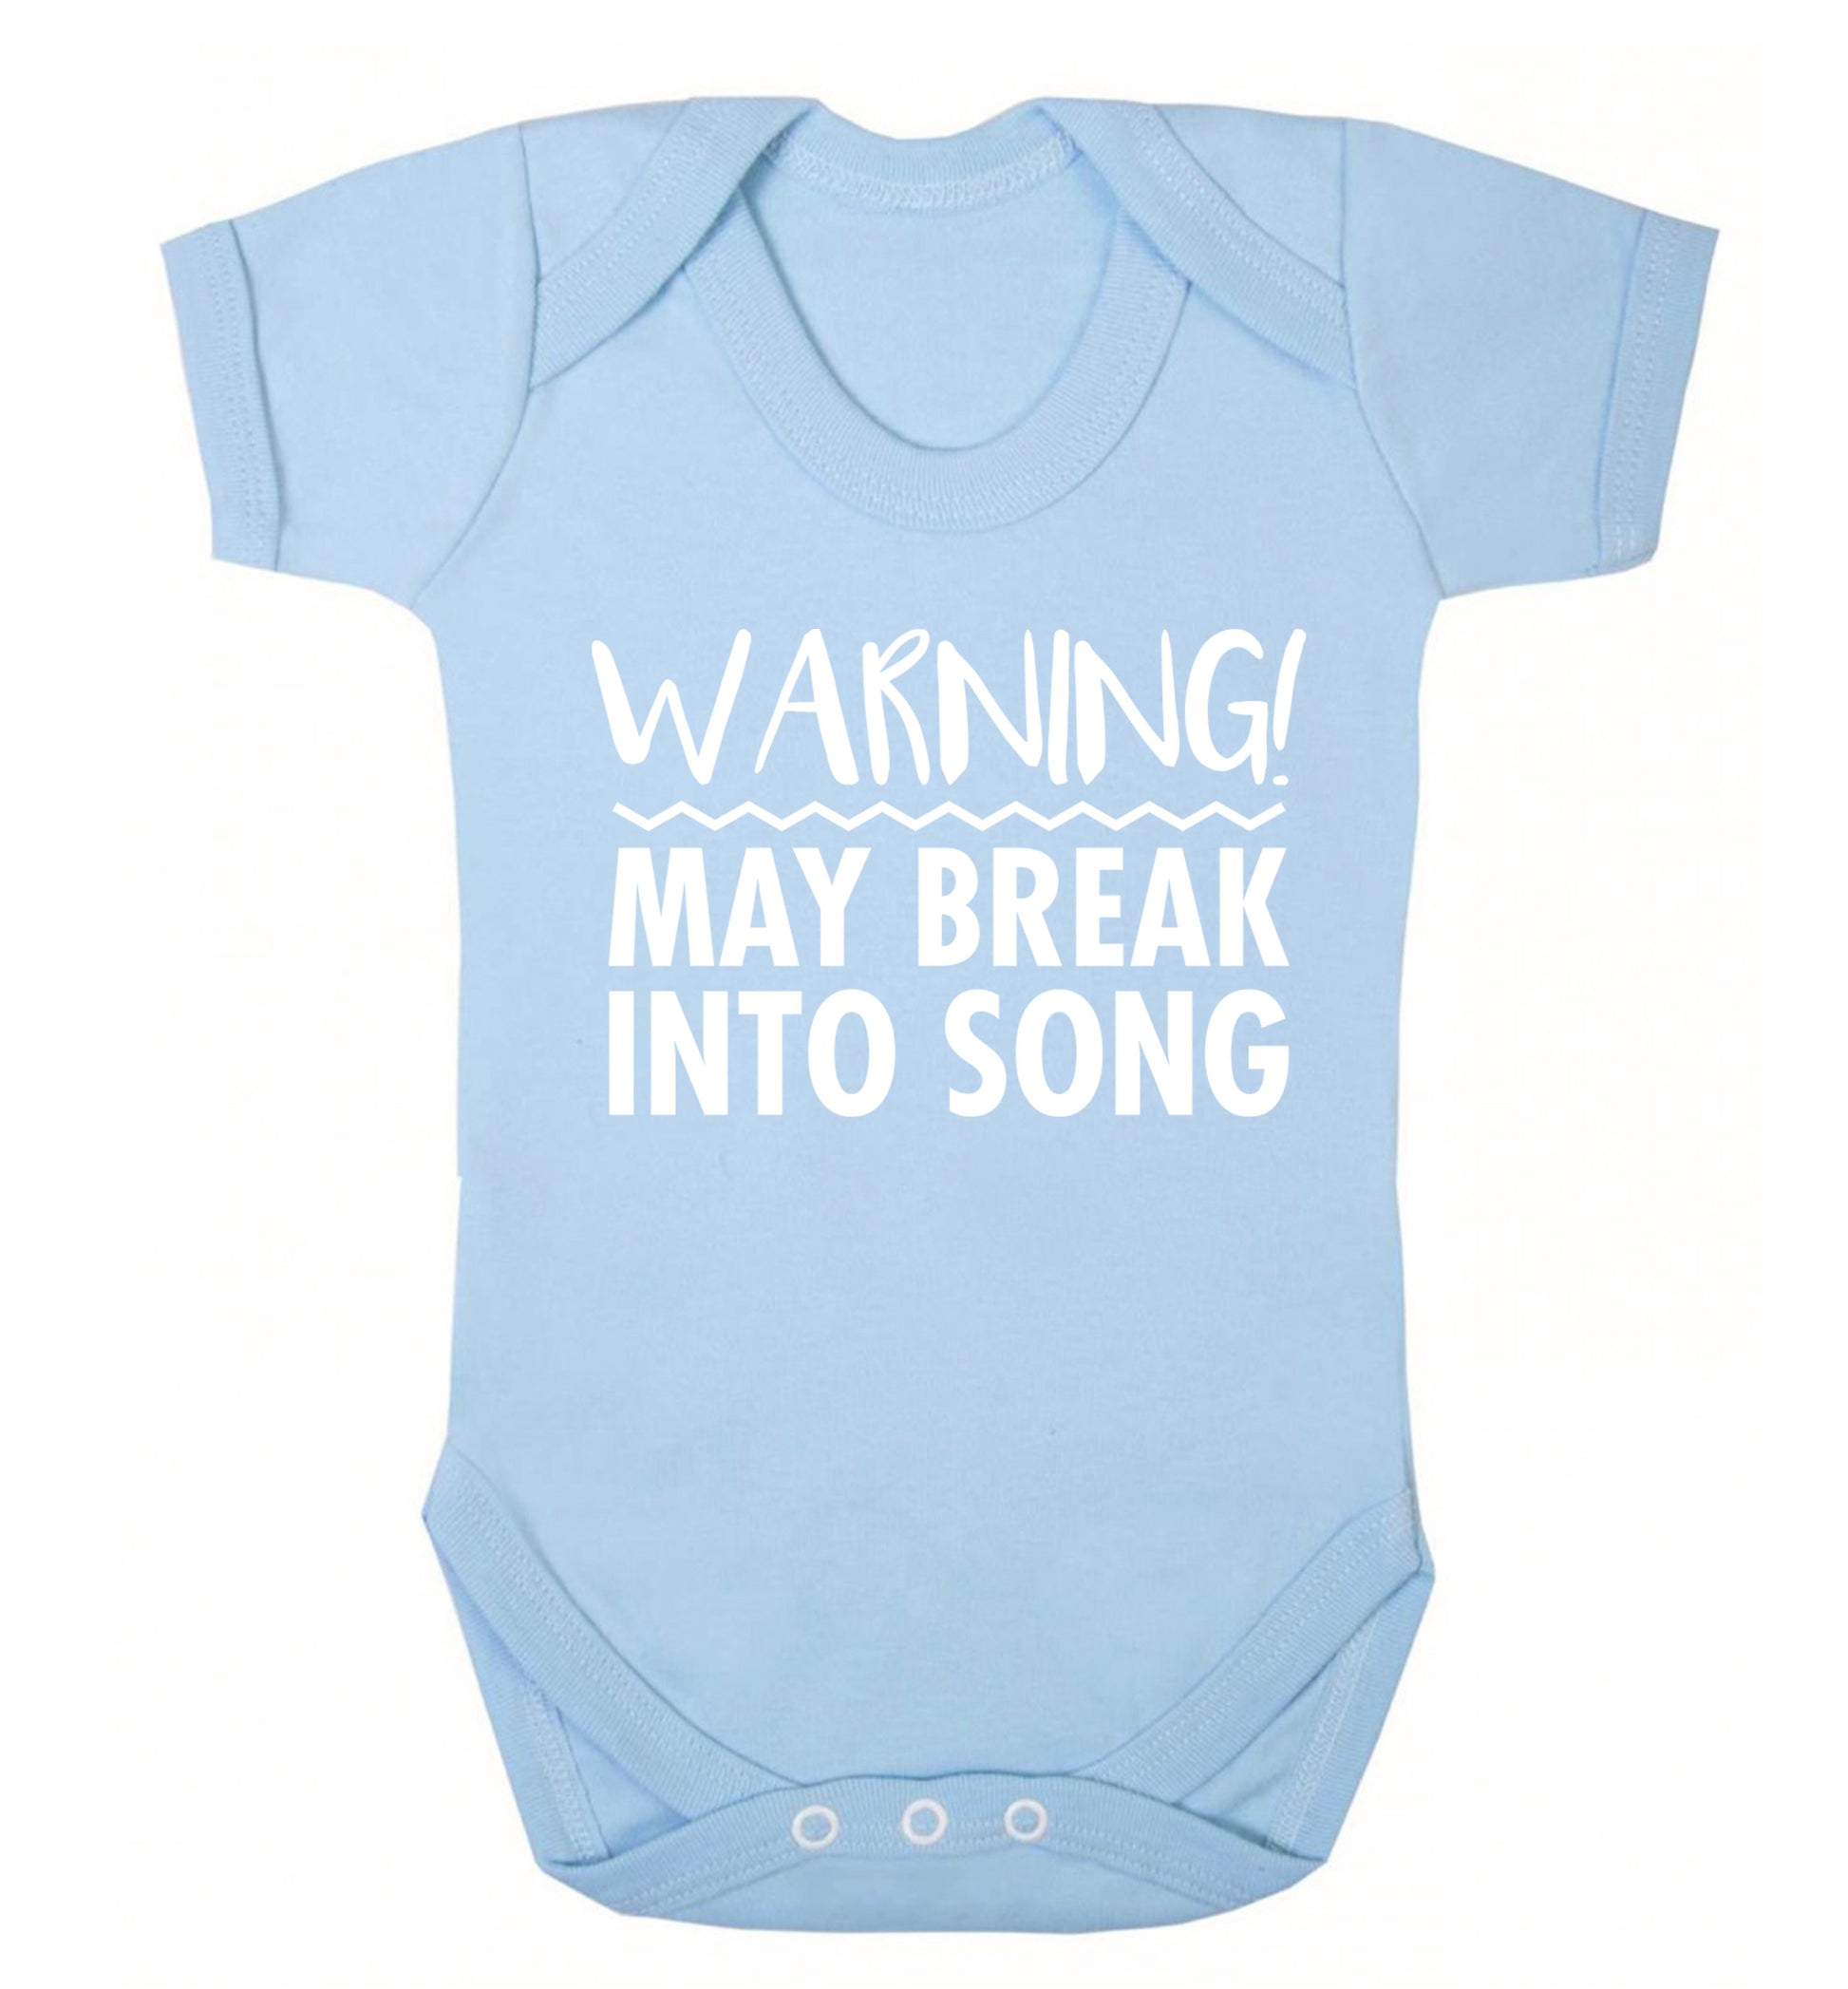 Warning may break into song Baby Vest pale blue 18-24 months